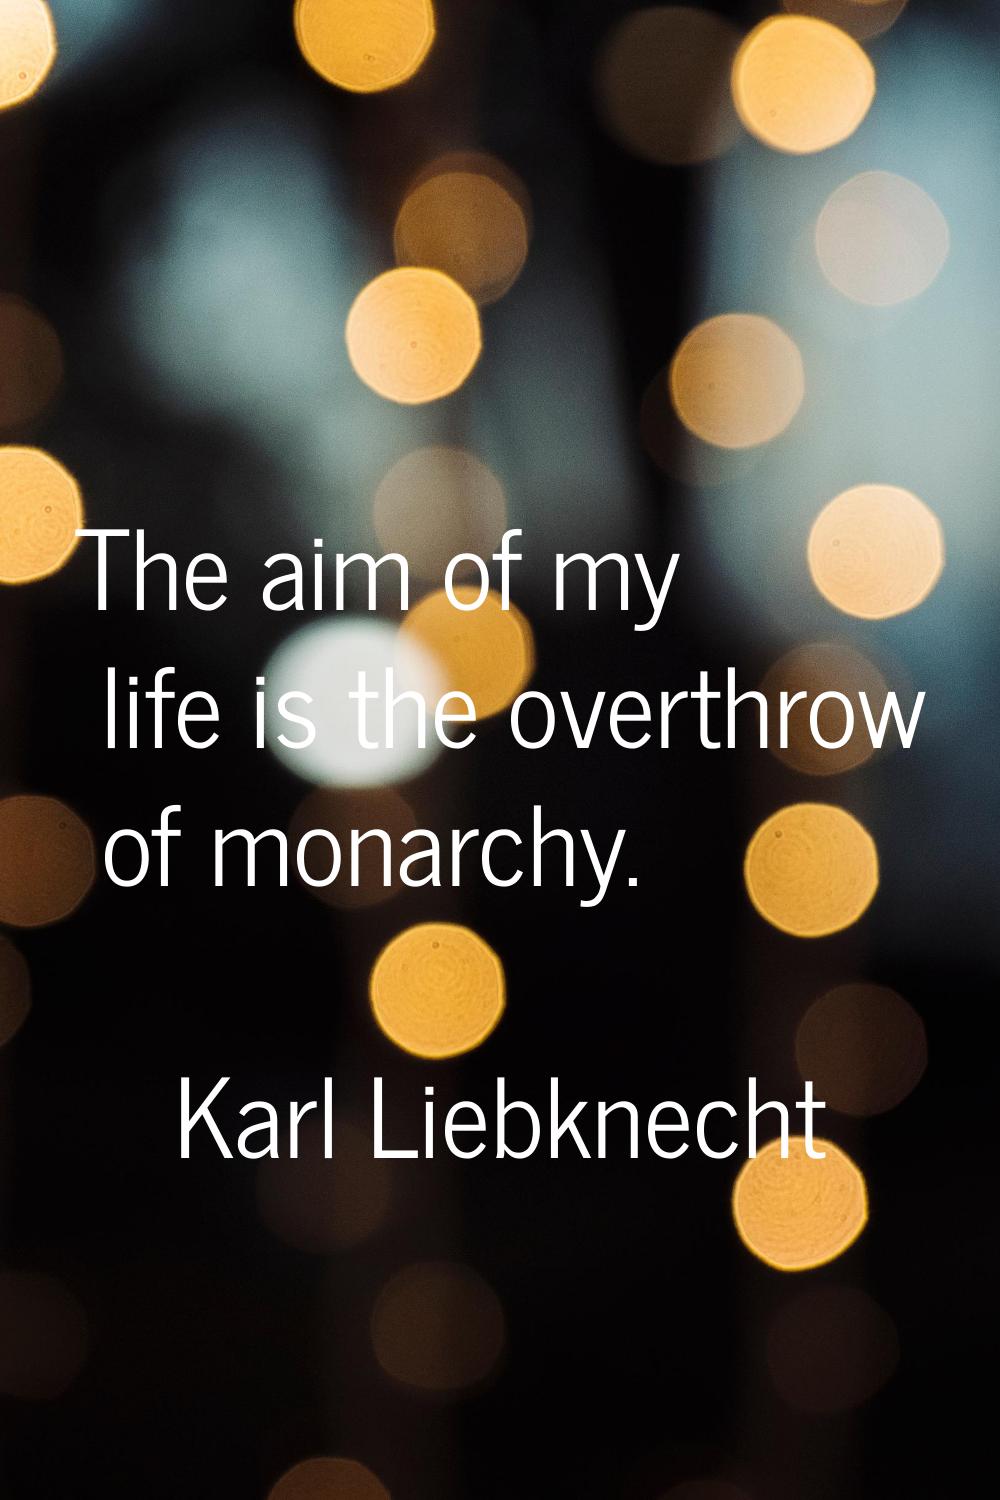 The aim of my life is the overthrow of monarchy.